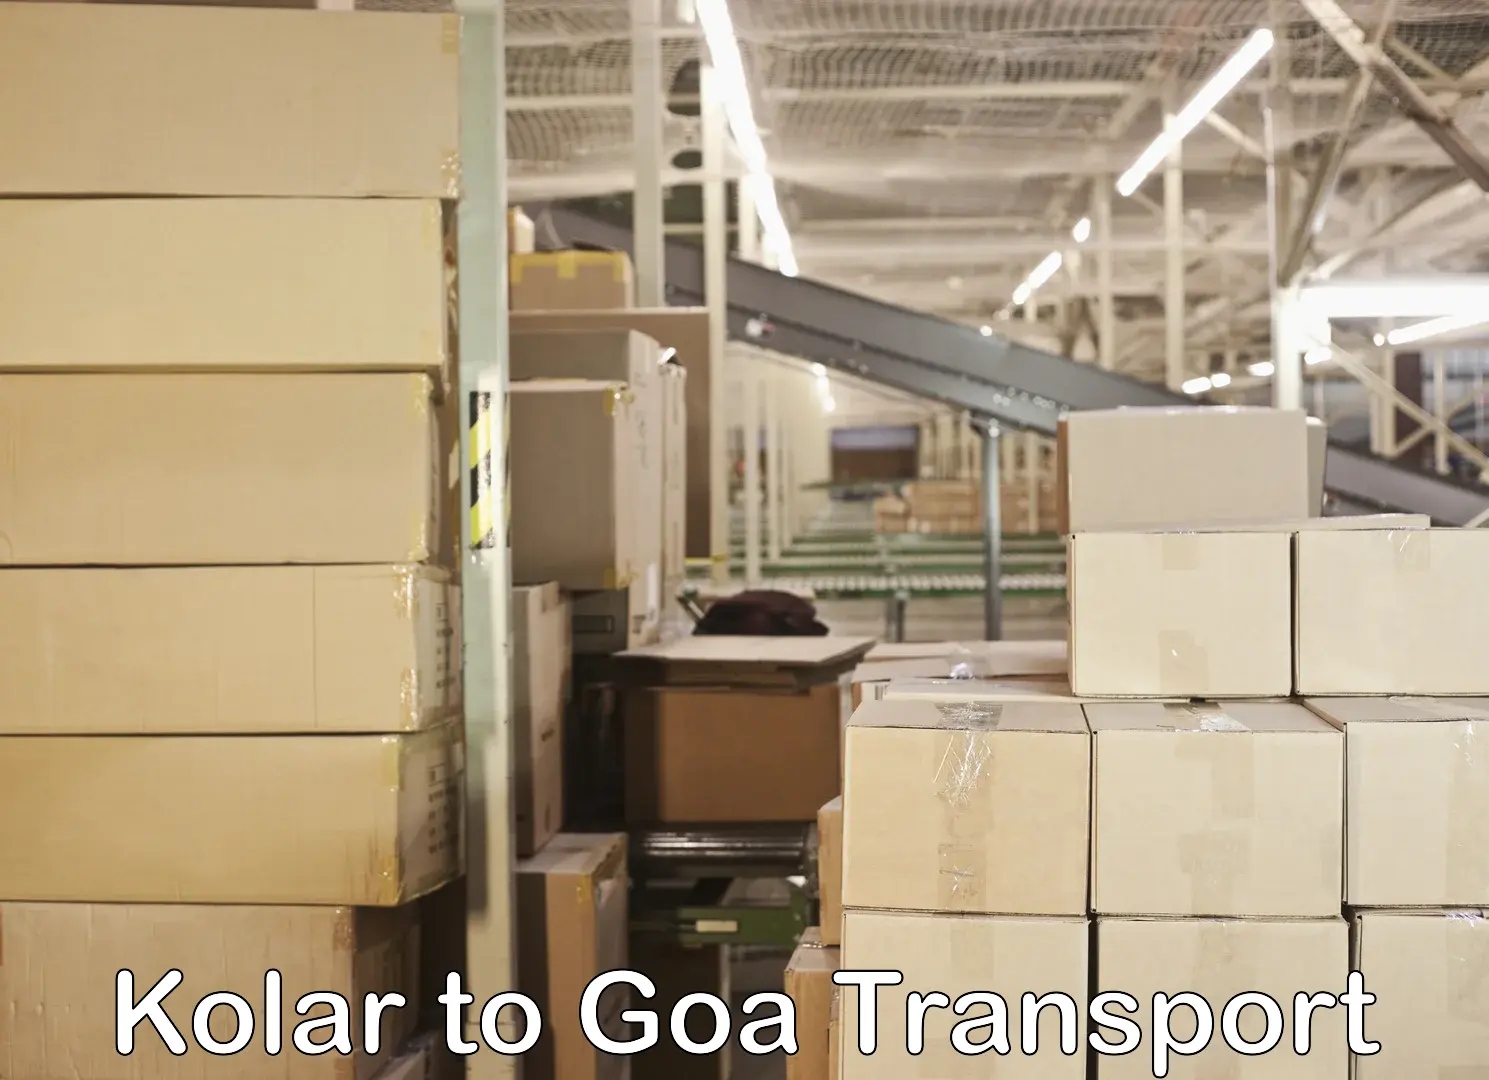 Transport bike from one state to another Kolar to IIT Goa